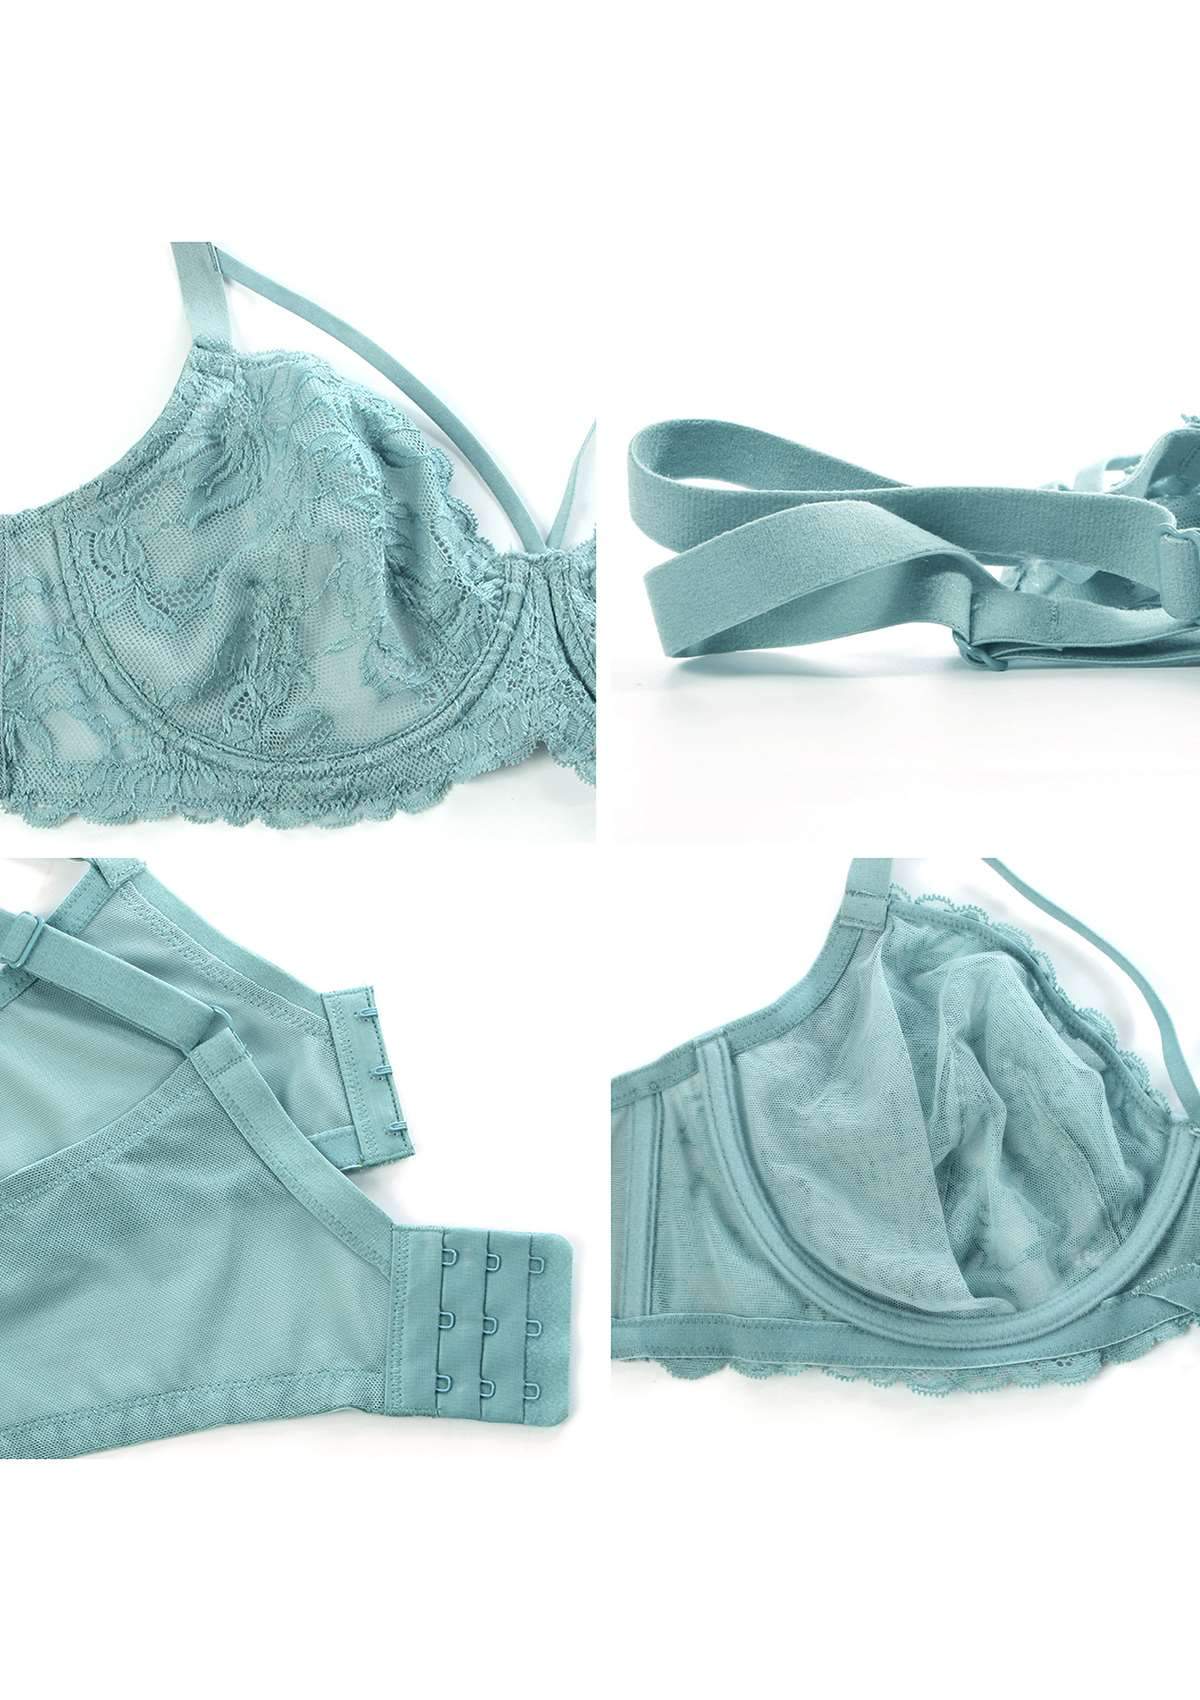 HSIA Pretty In Petals Unlined Lace Bra: Comfortable And Supportive Bra - Pewter Blue / 40 / DD/E